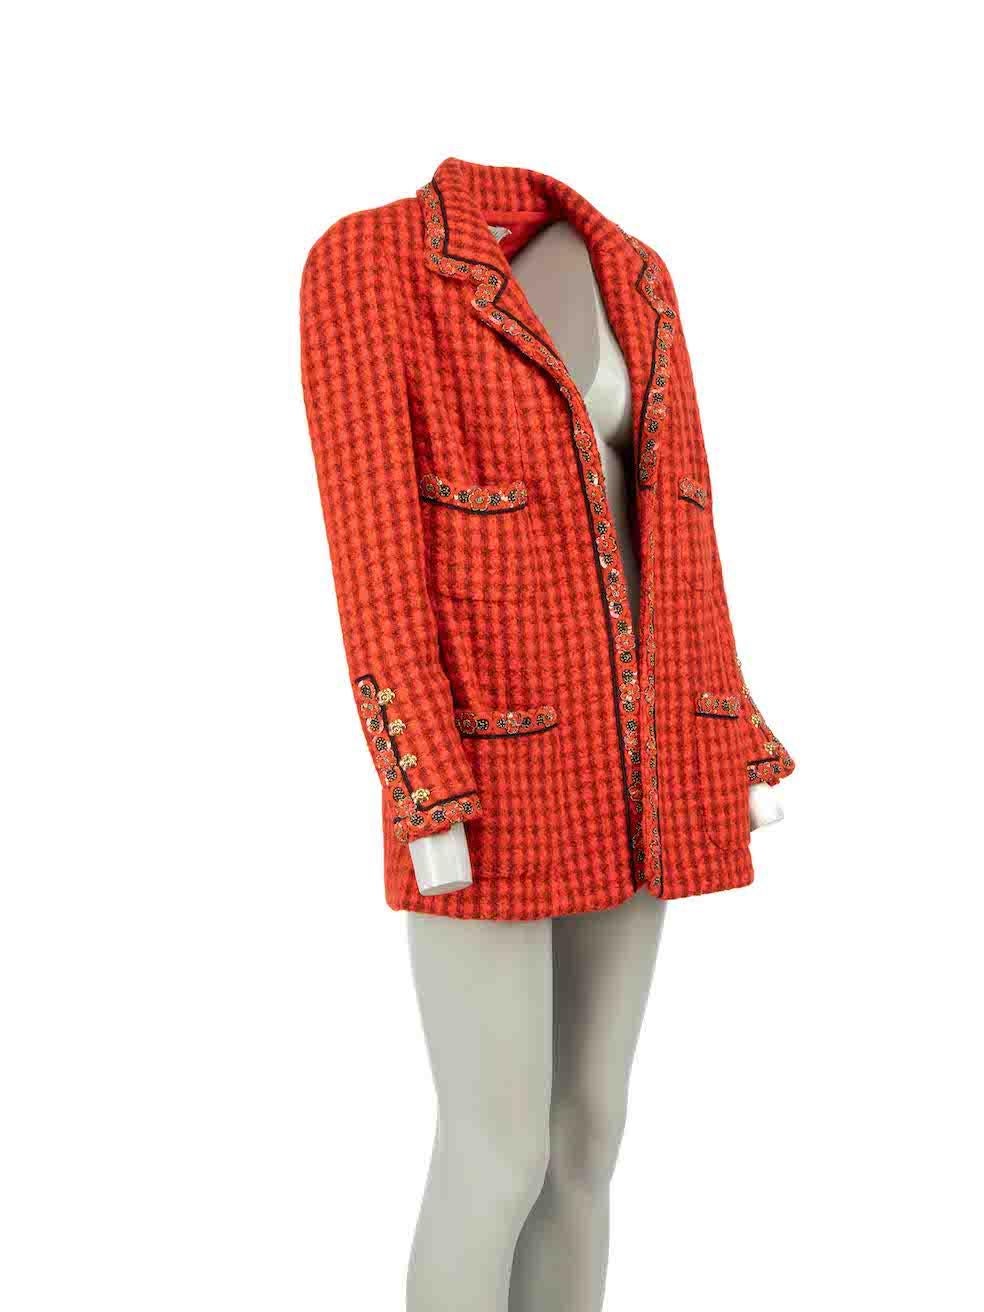 CONDITION is Very good. Minimal wear to jacket is evident. Minimal loose stitching to embellishments and brand label is slightly loose on this used Chanel designer resale item.

Details
F/W 1990/1991
Vintage
Red
Wool
Blazer
Gingham pattern
Floral